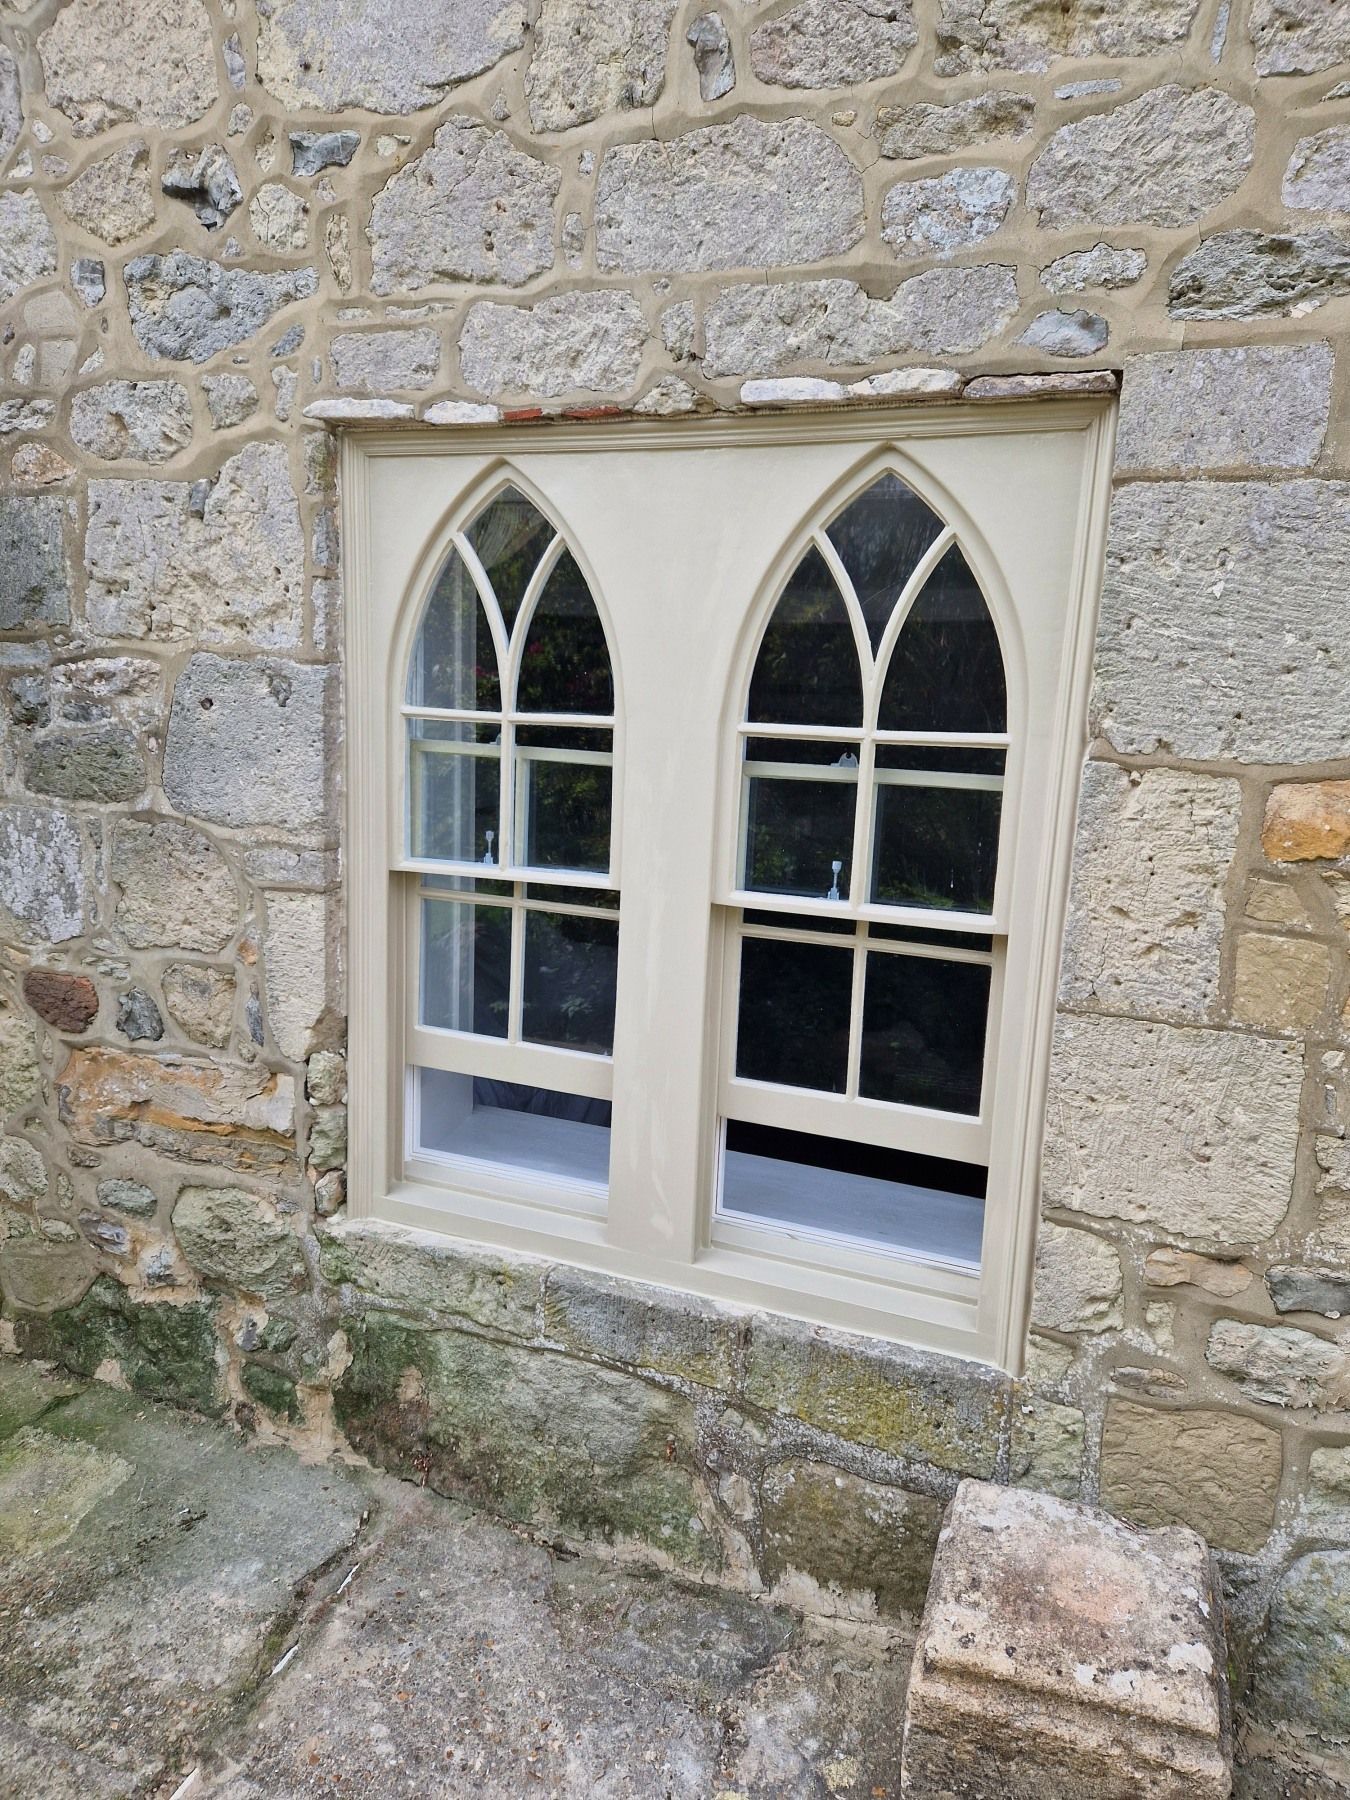 a stone wall with gothic arched windows